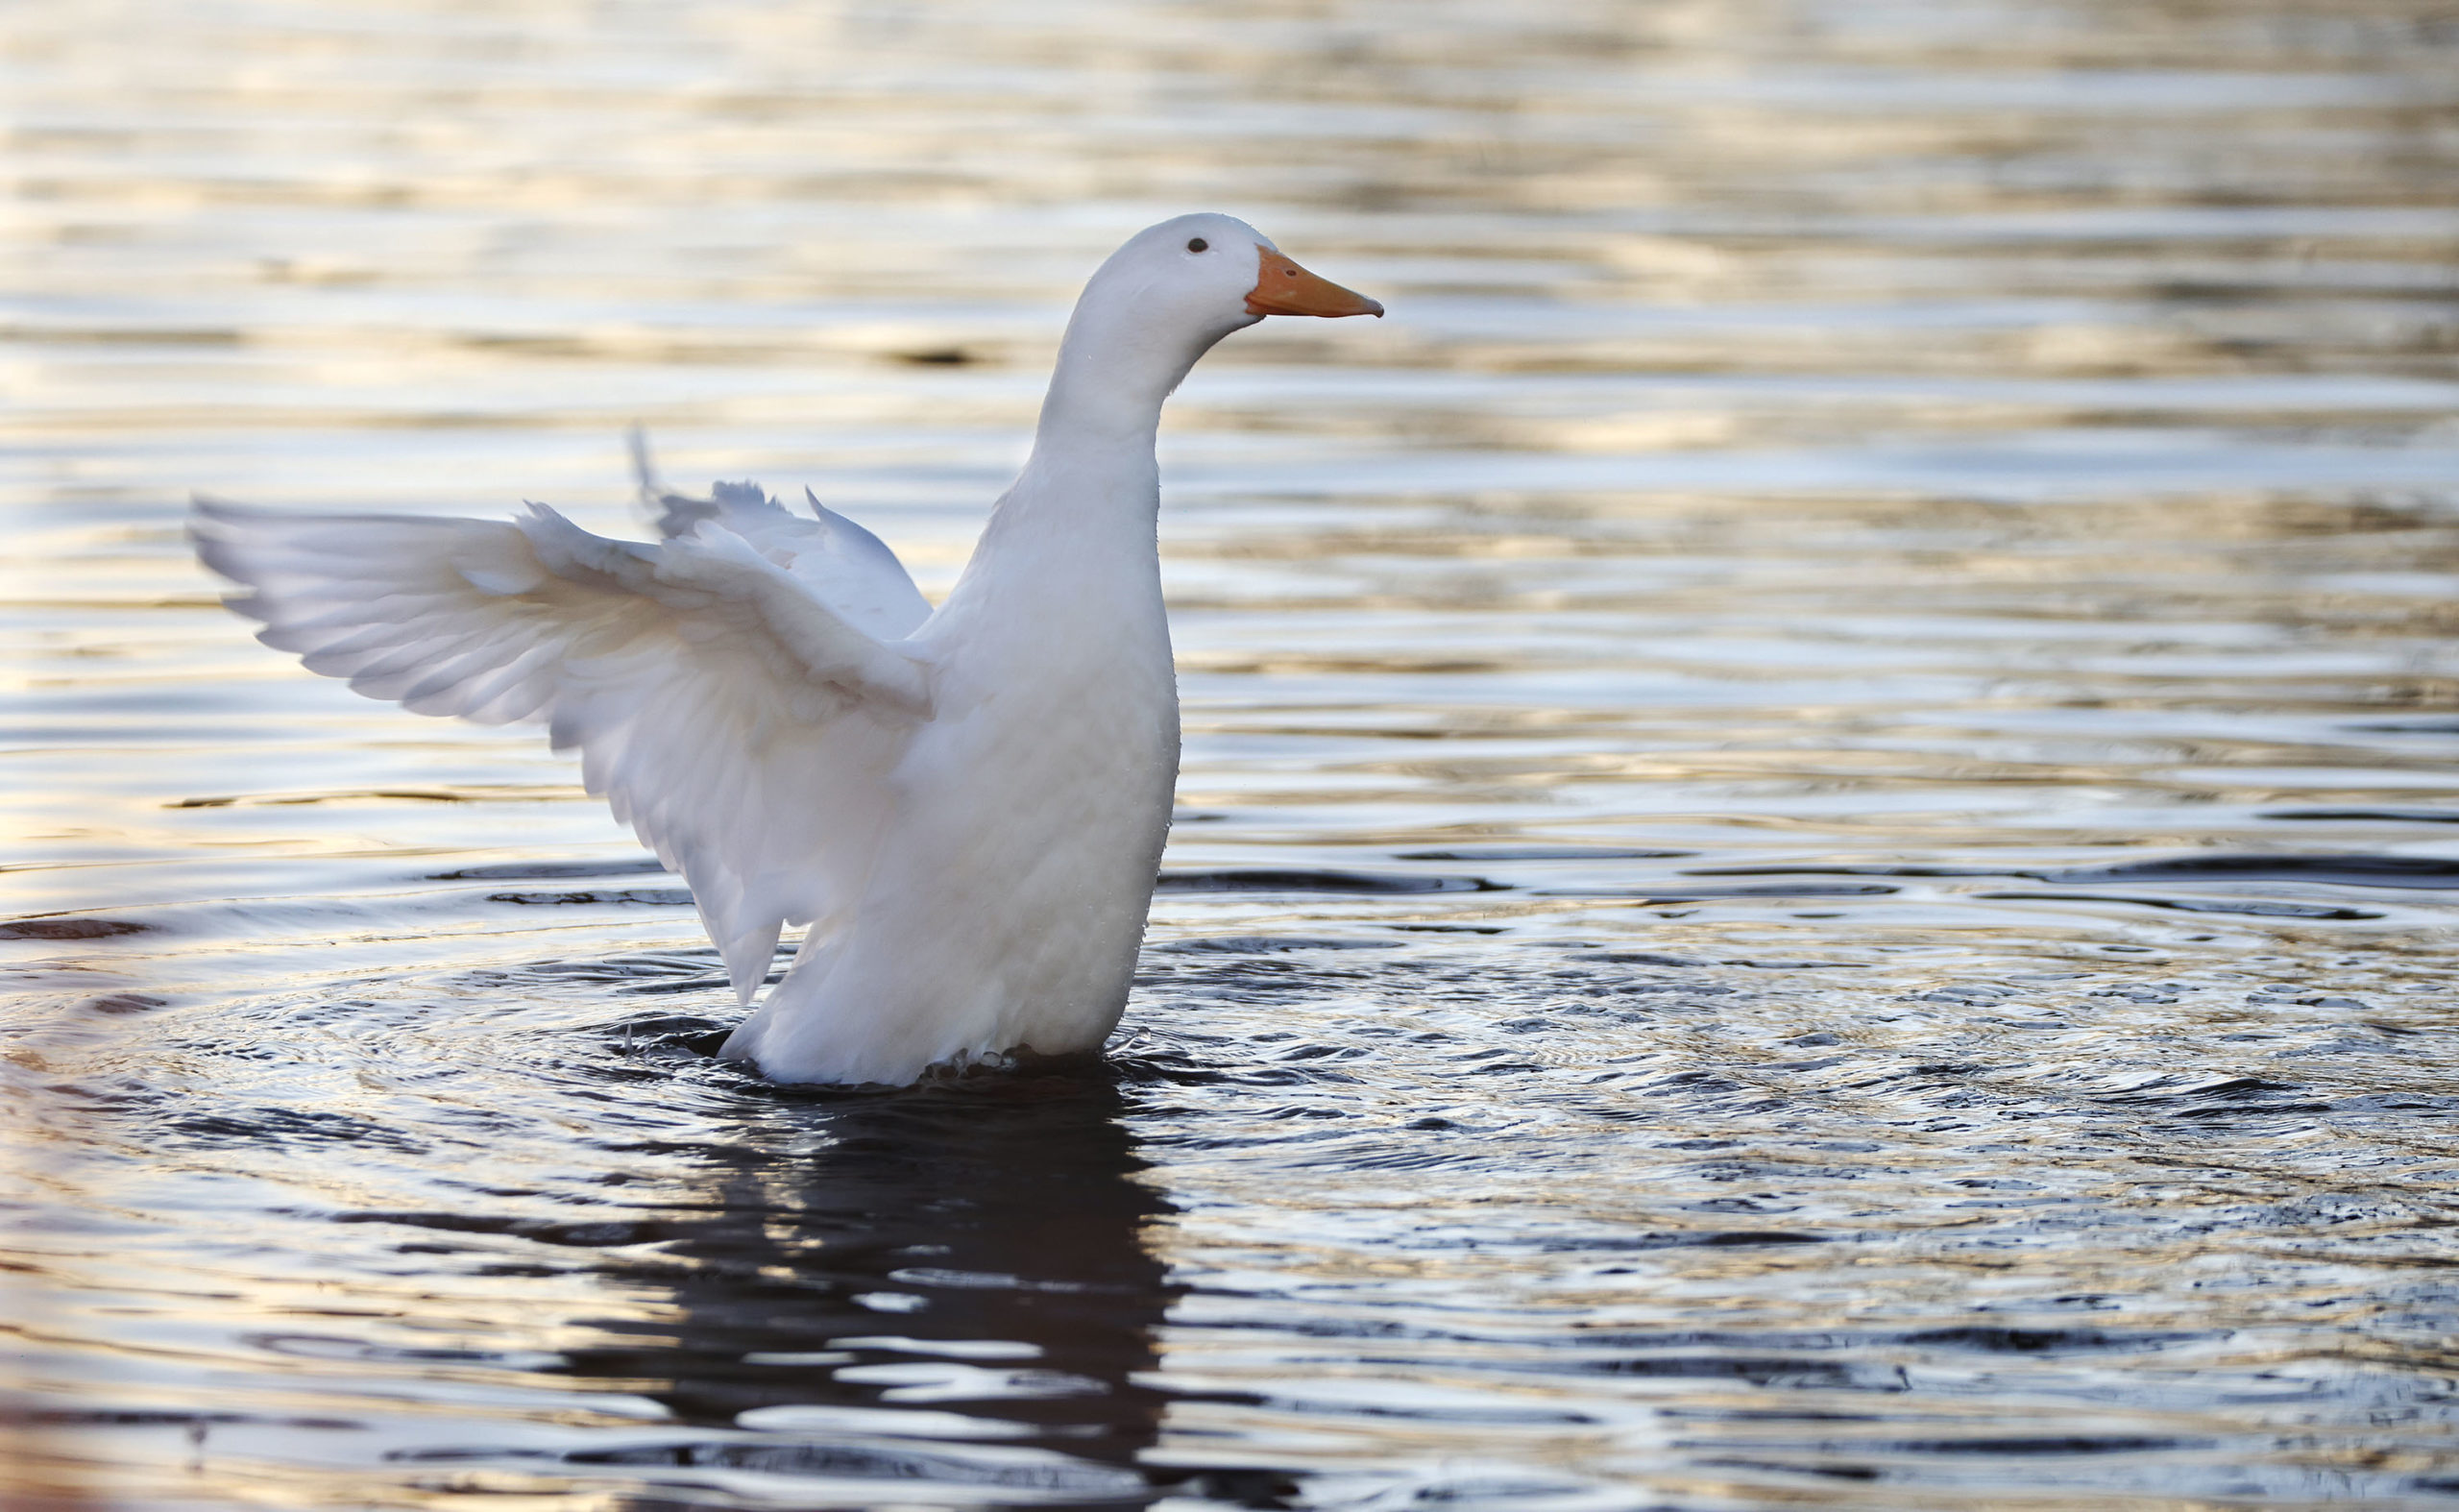 wildlife officials are worried about ducks and geese dumped in Utah ponds....